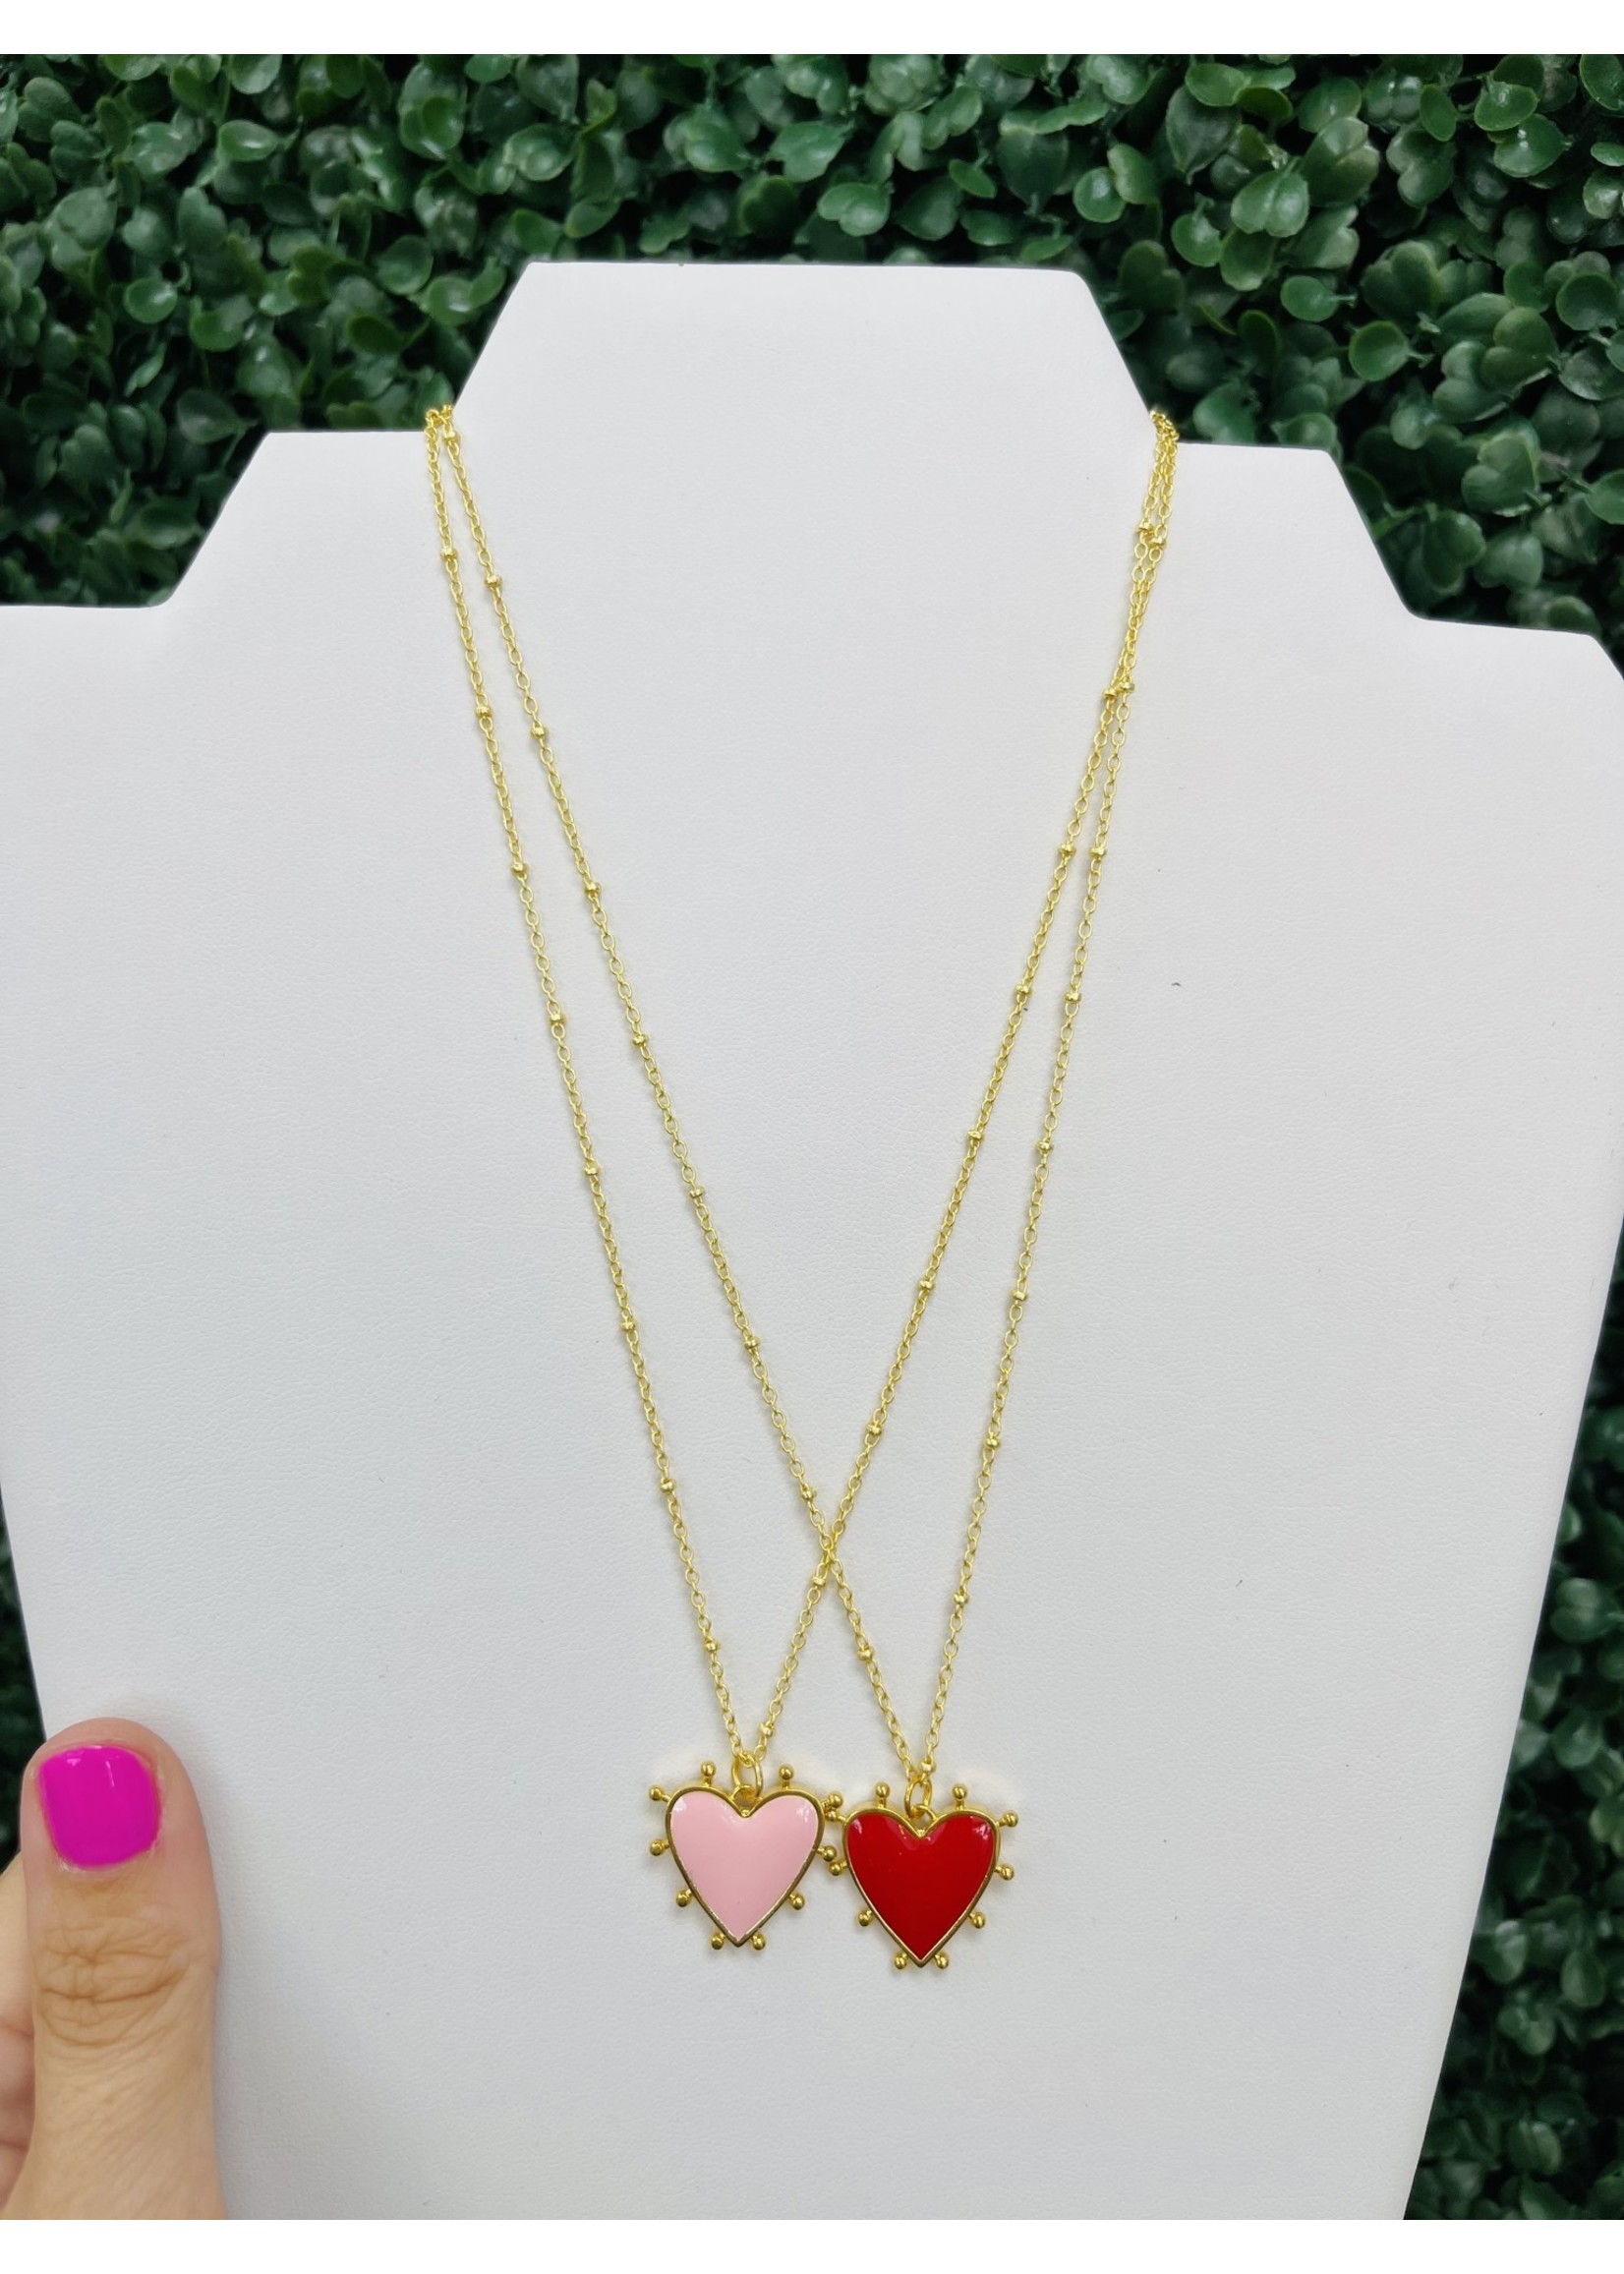 Lauren Kenzie 24K Gold Plated Chain with Heart Pendant